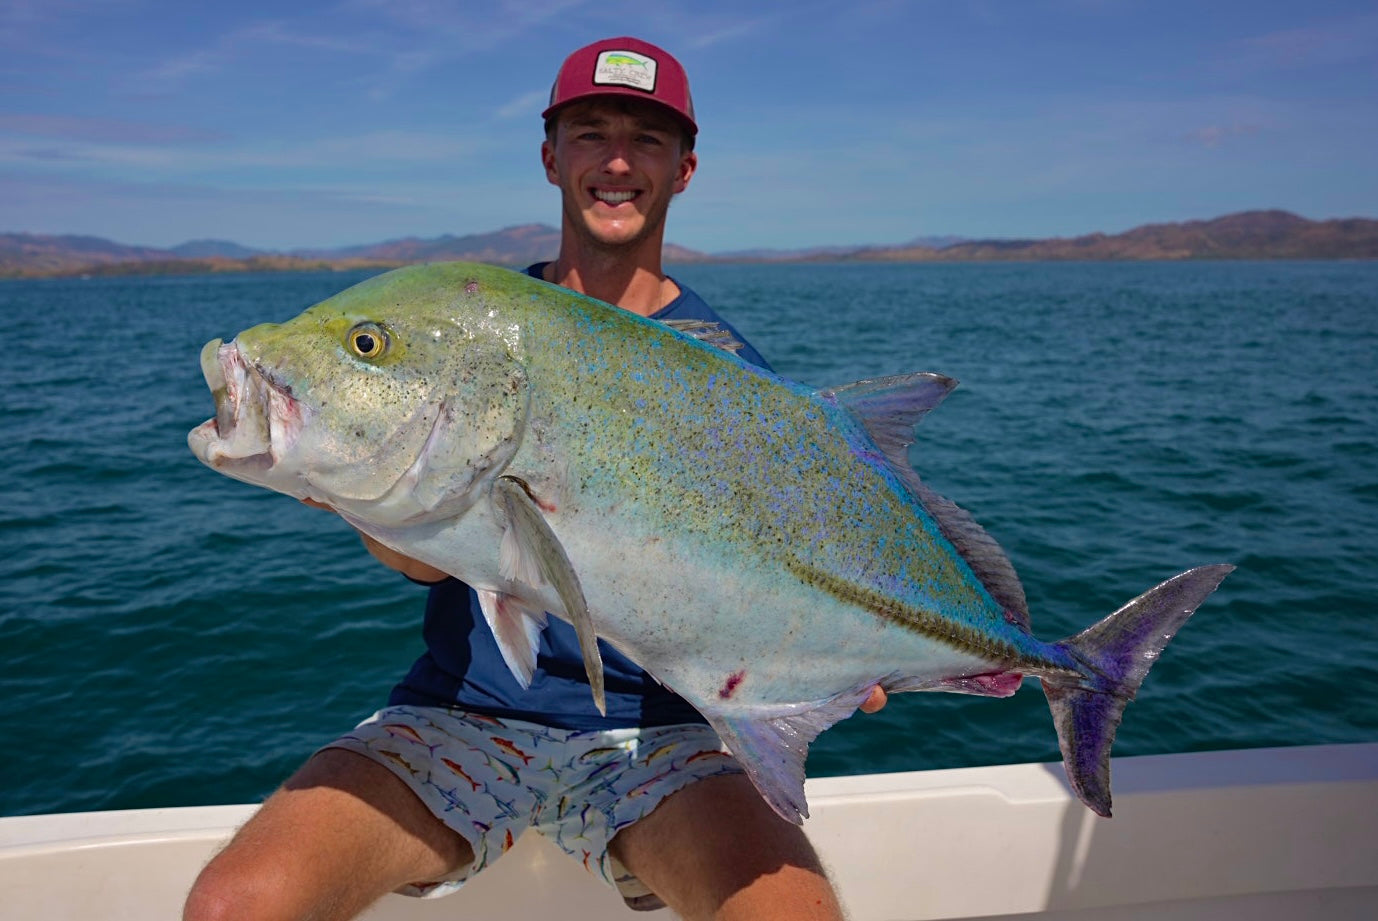 Kieren with a Bluefin Trevally caught in Panama